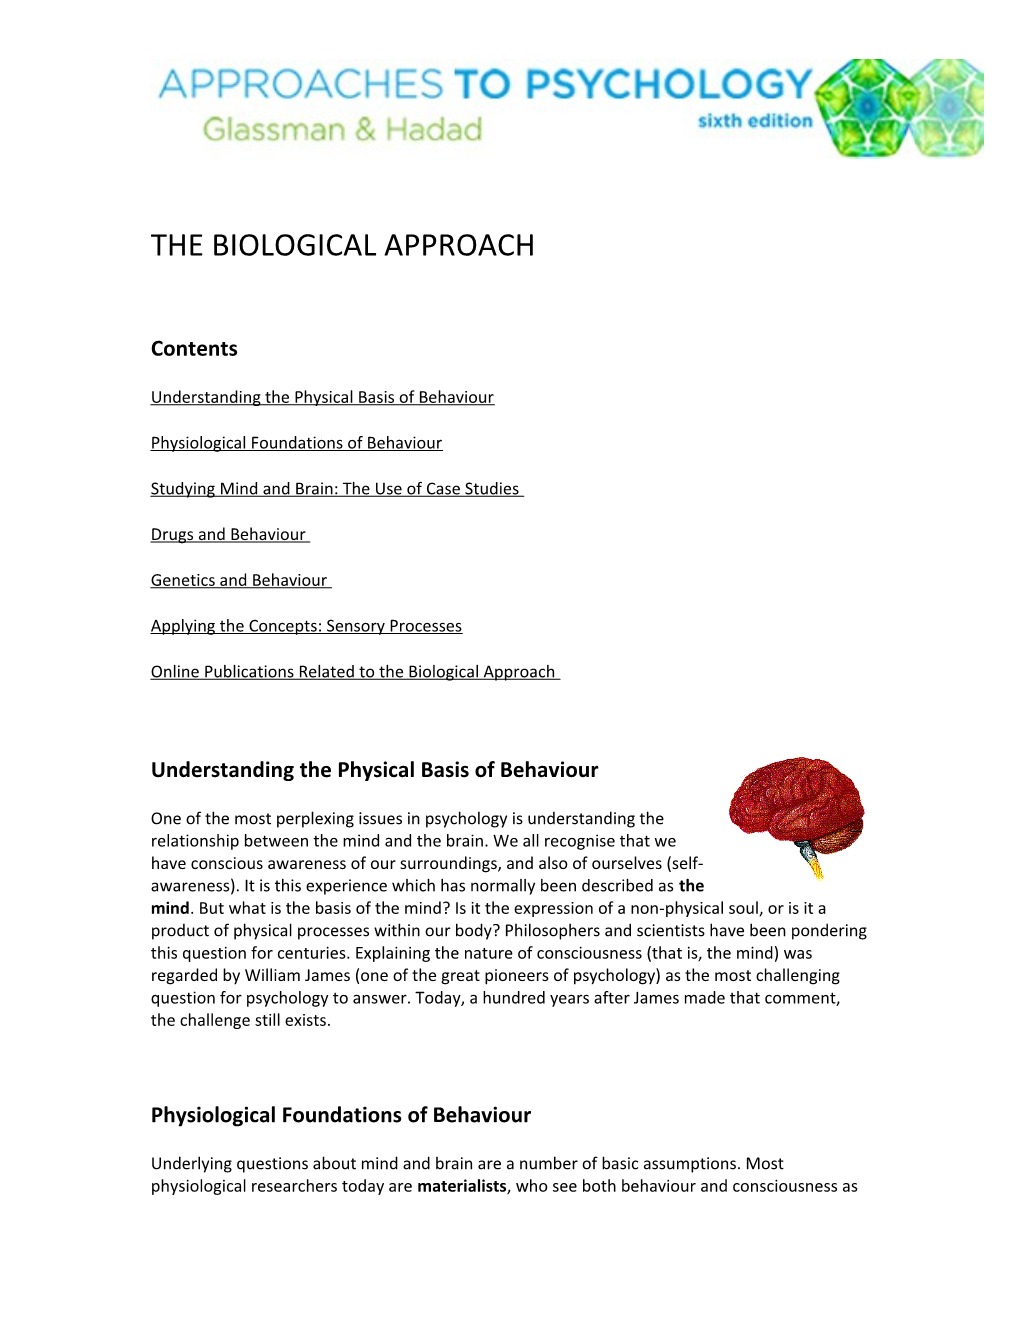 The Biological Approach